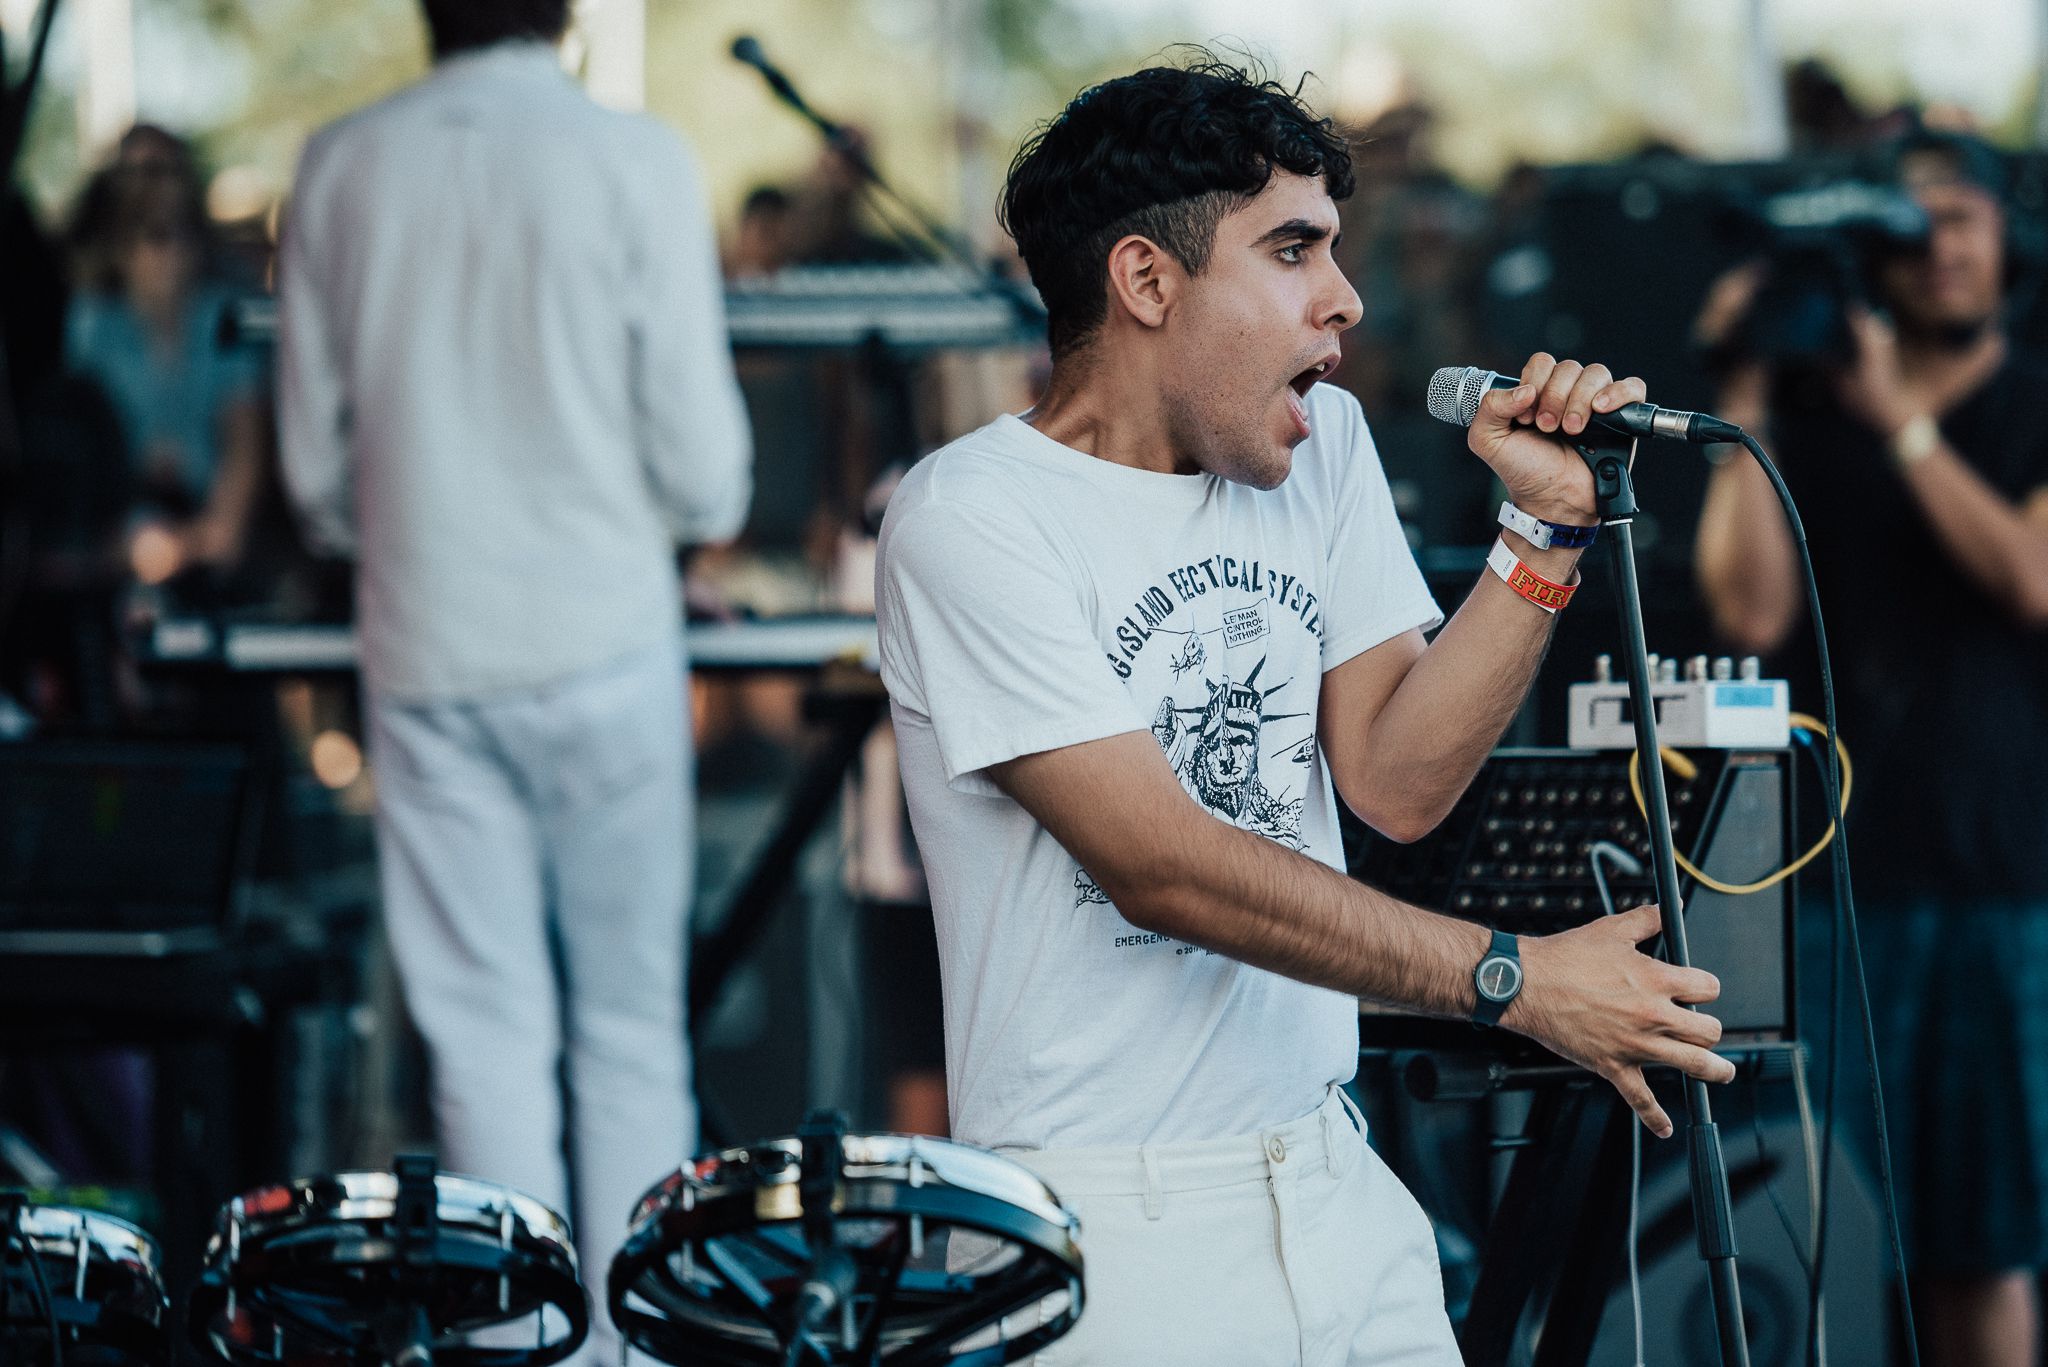 sarastrick social neonindian 1 Float Fest Offers One Wet Hot American Summer in Texas